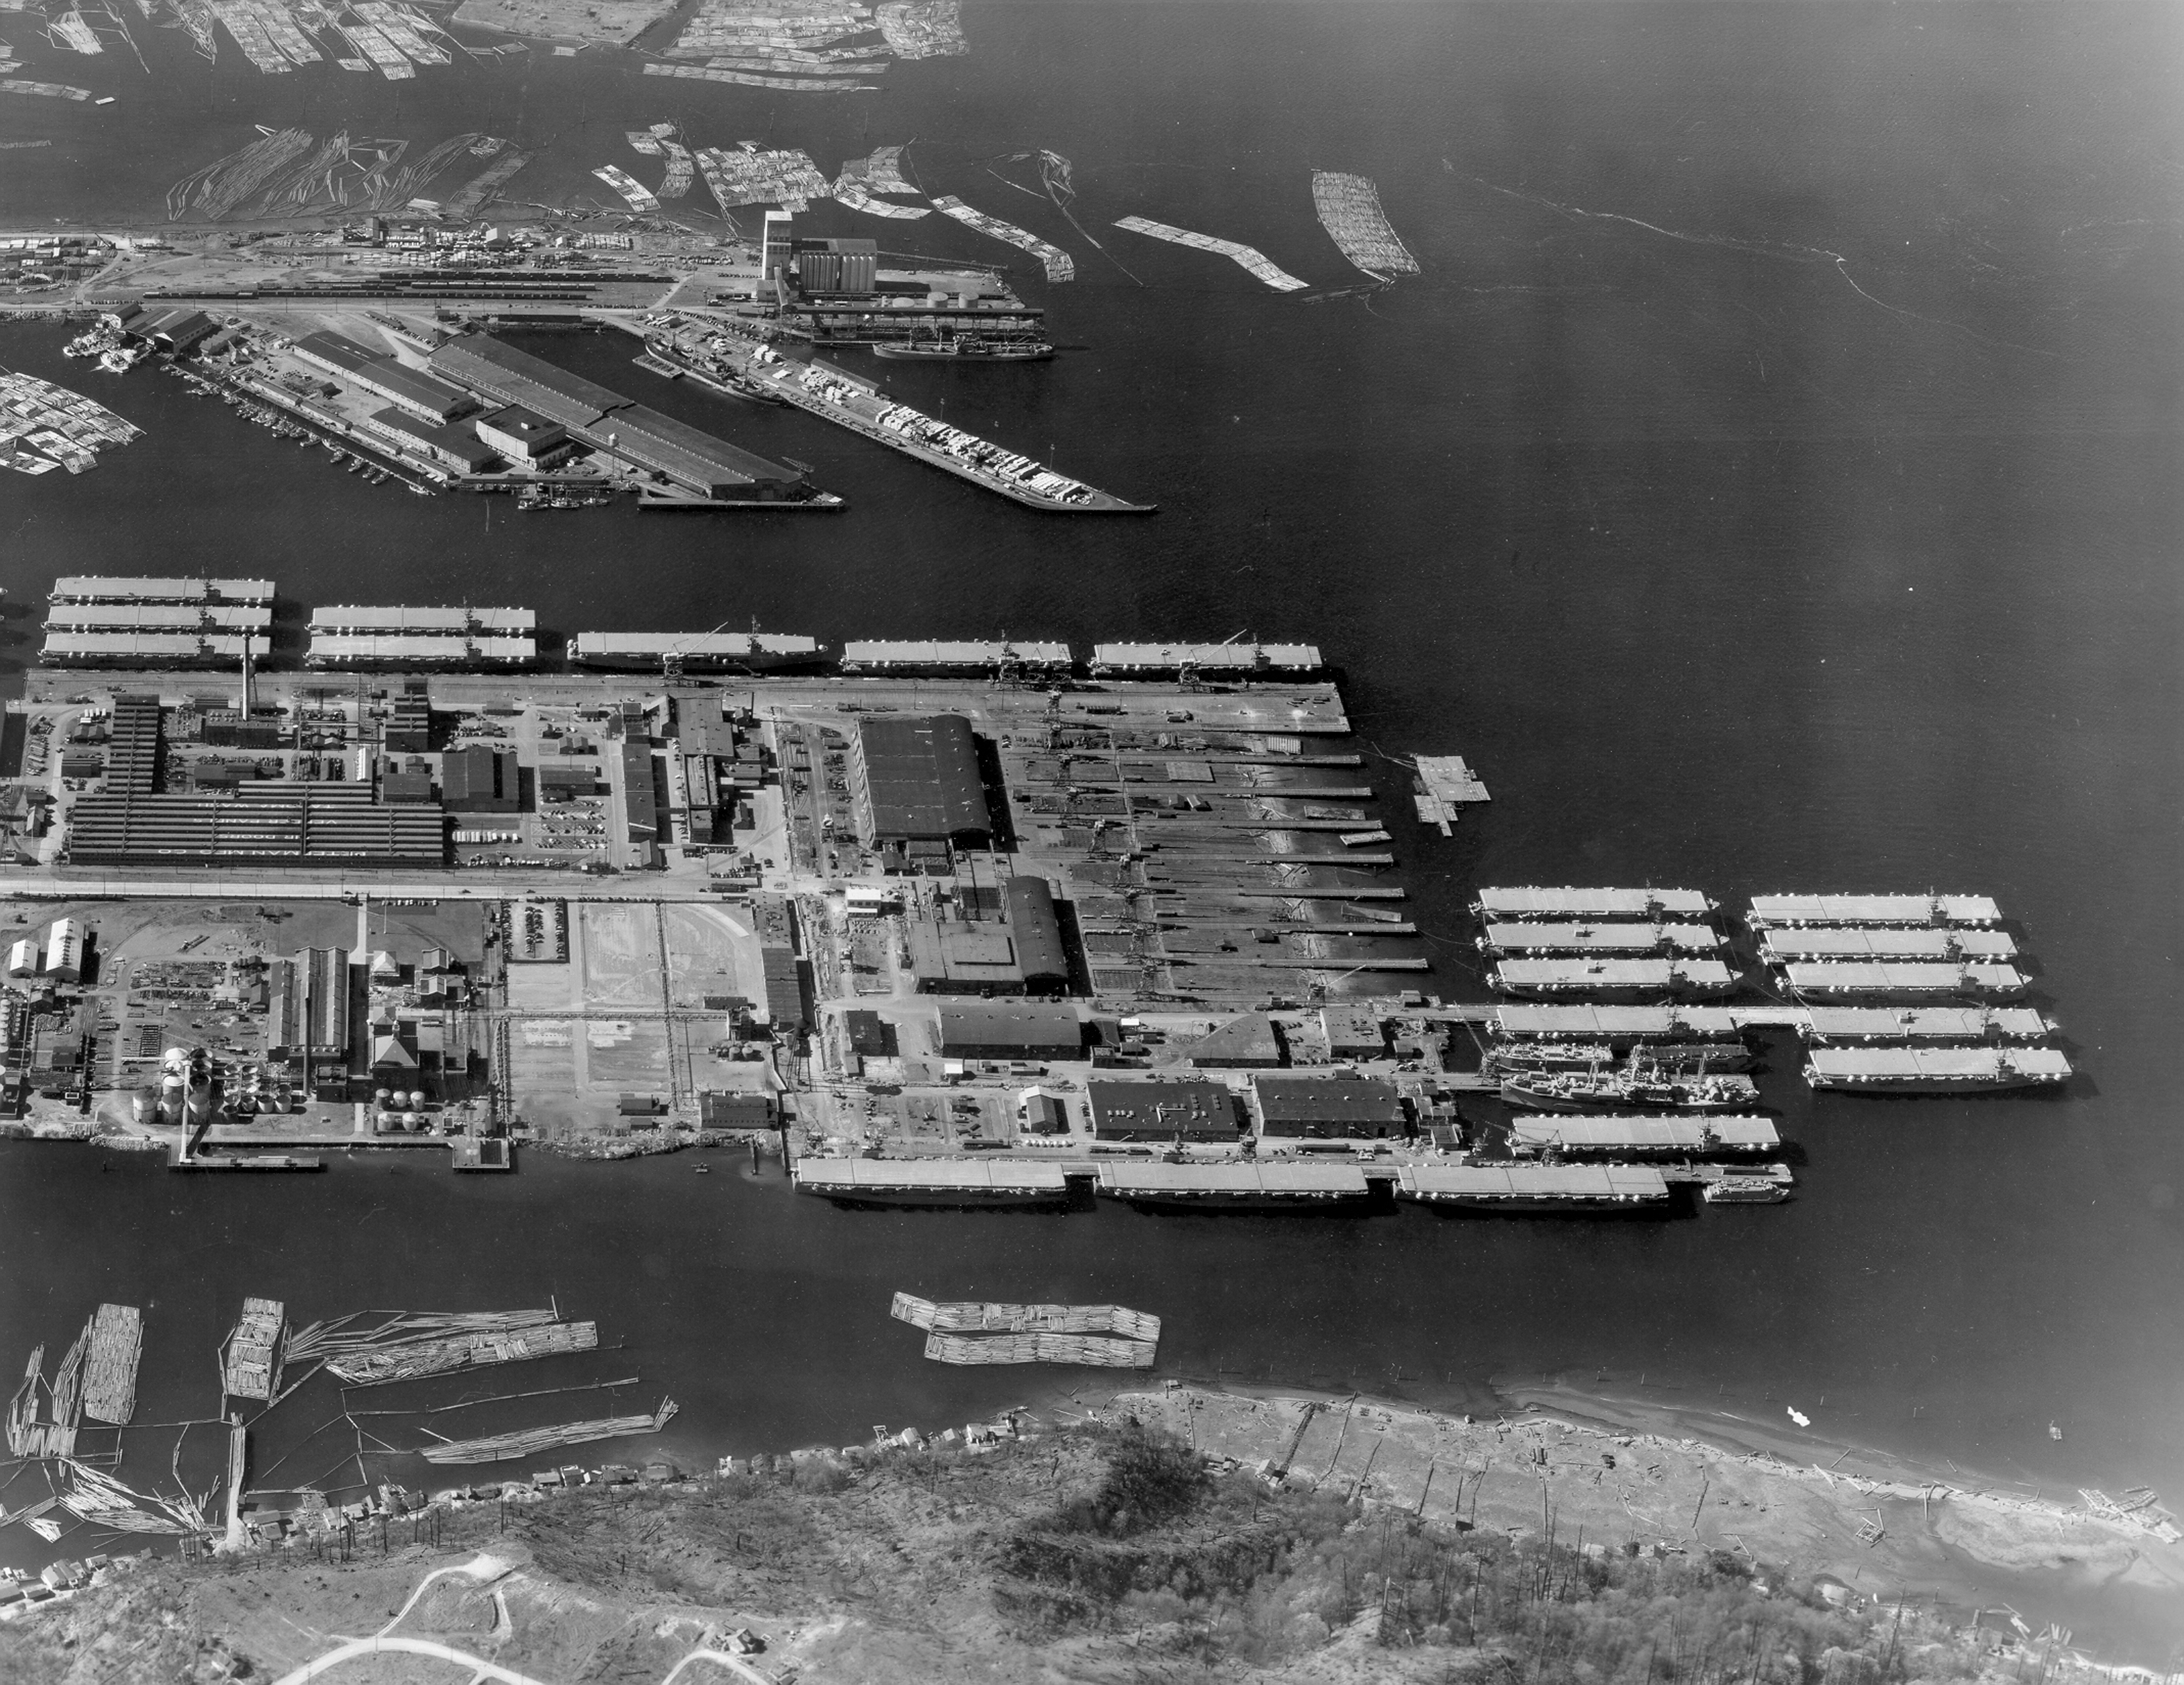 Todd-Pacific Shipyard, Tacoma, Washington, United States in 1942-43. 21 of the 37 Bogue-class escort carriers built at Todd-Pacific are seen in this photo and 5 more are just out of frame to the left.